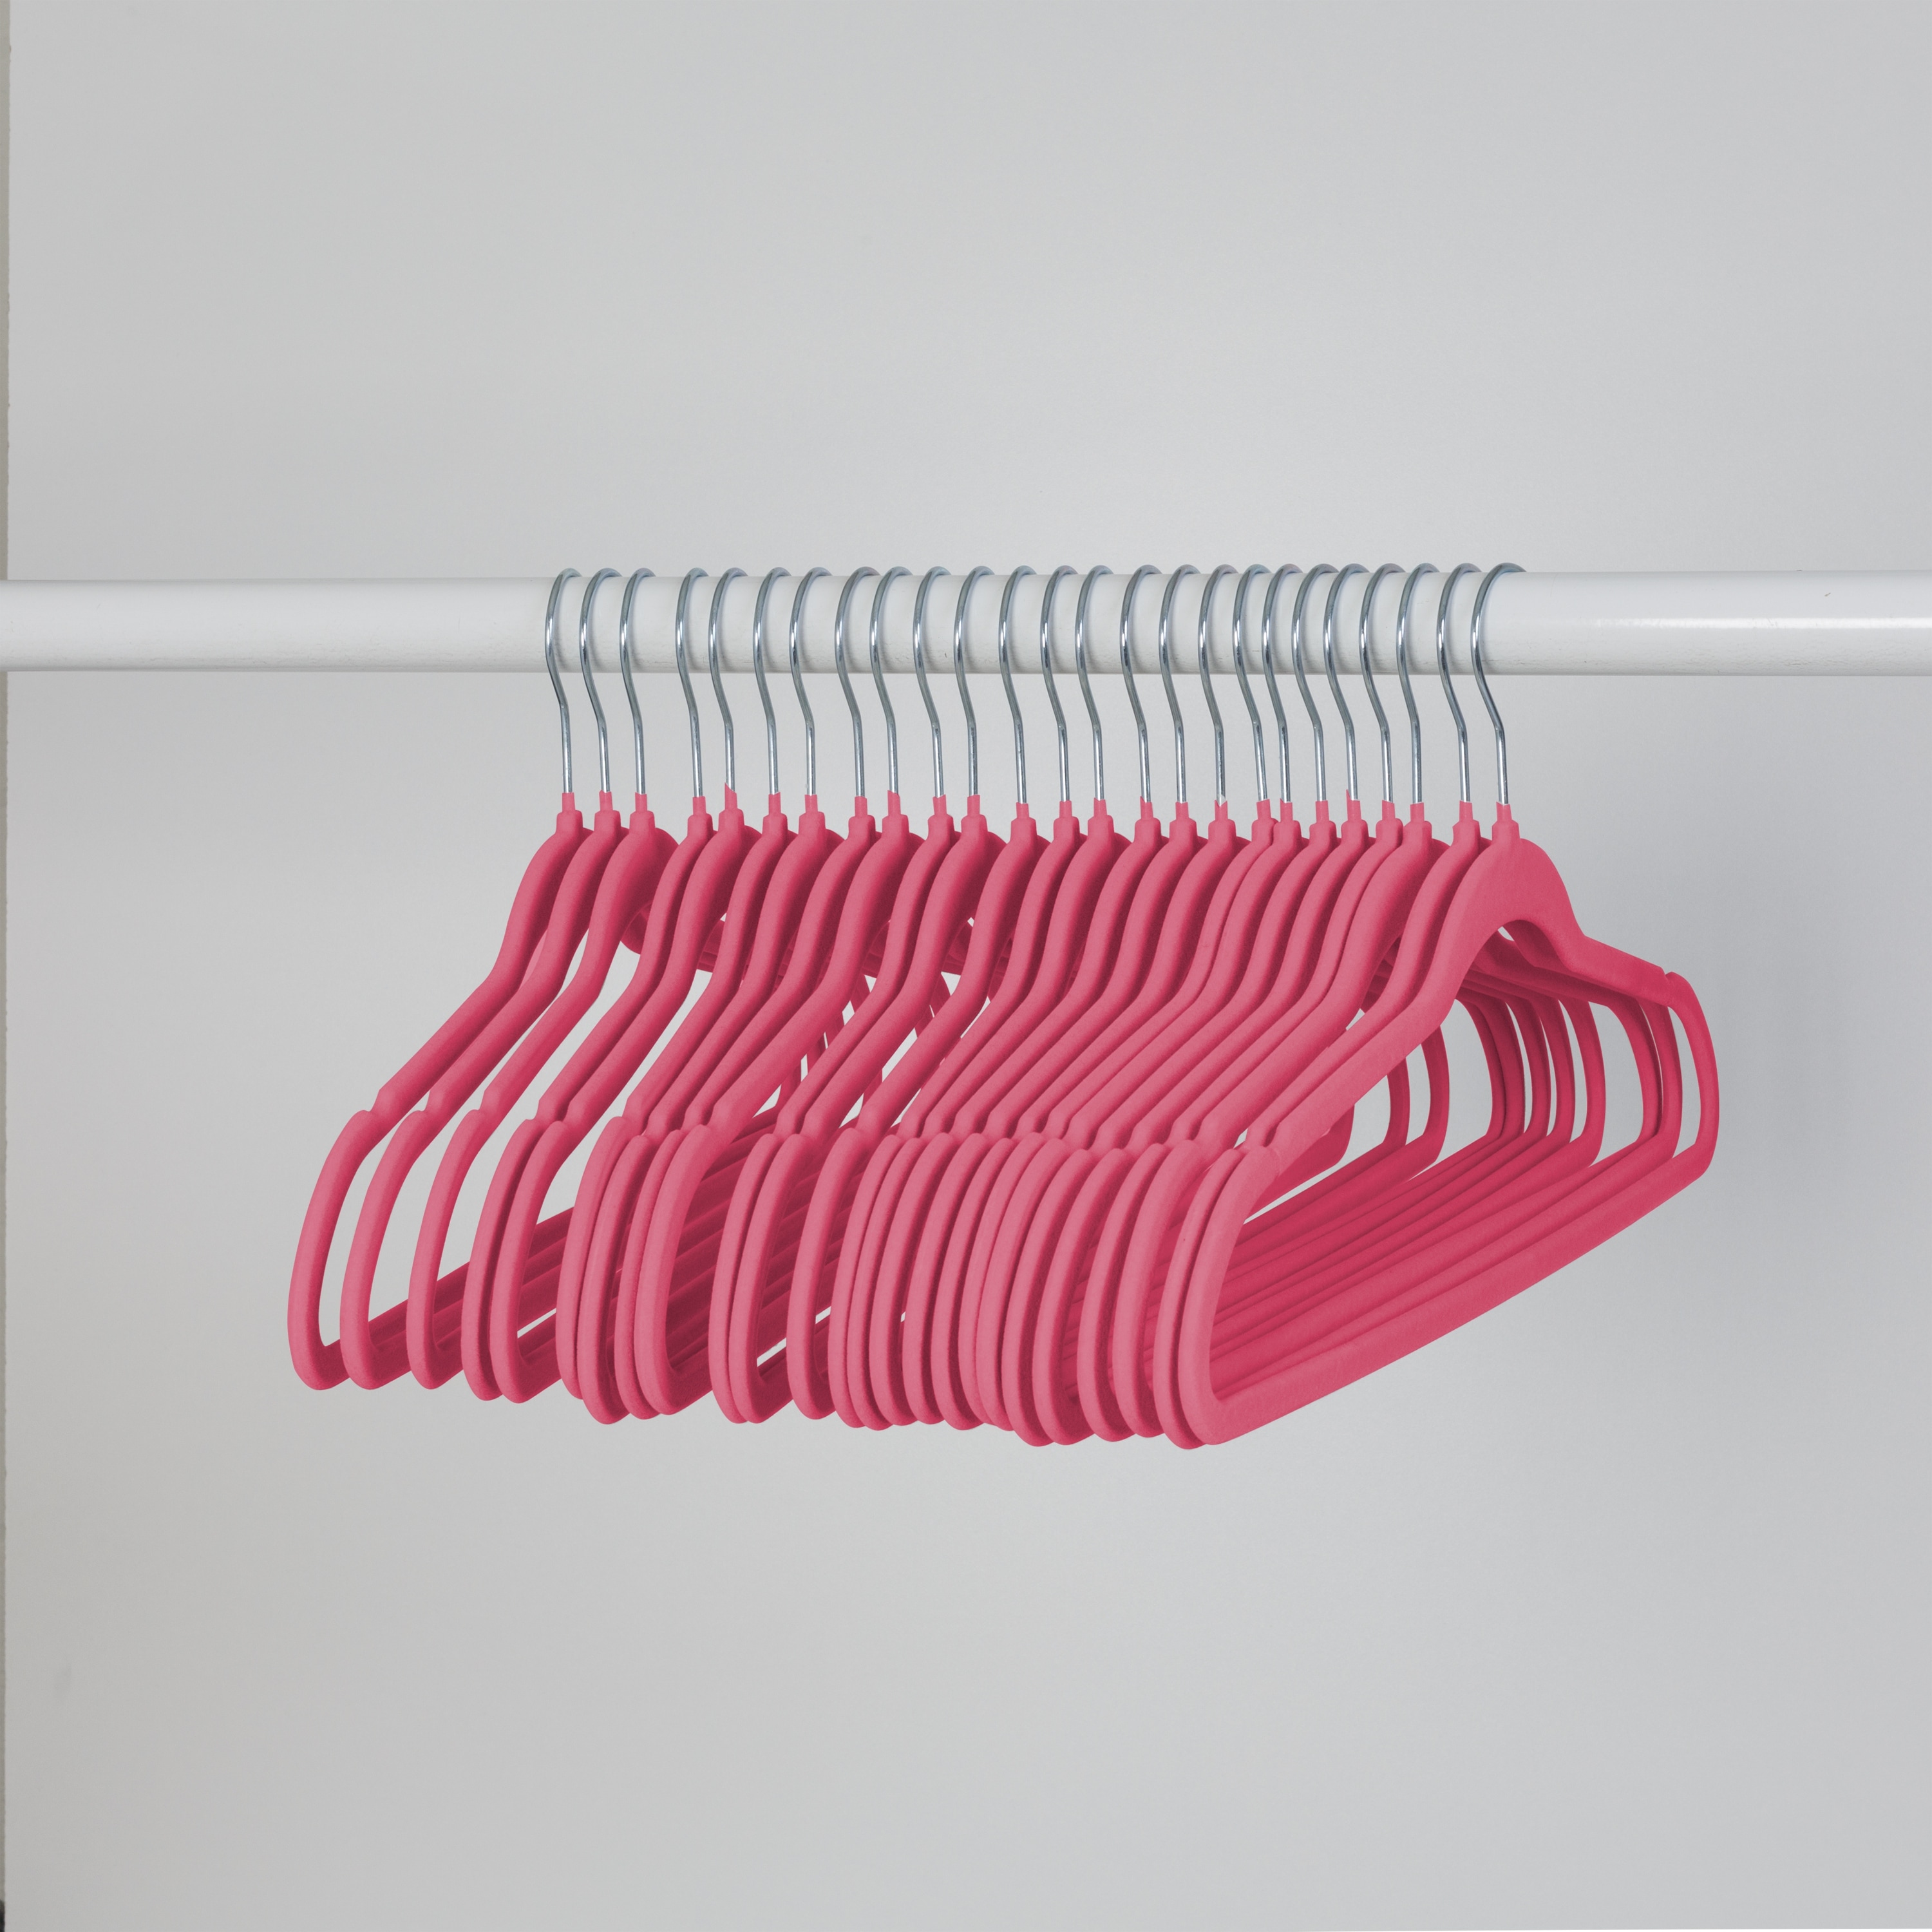 https://ak1.ostkcdn.com/images/products/is/images/direct/238fbf7561c6a7517734a25131c602bf1e7db0ea/Plastic-and-Velvet-Non-Slip-Hangers-%2825-Pack%29.jpg